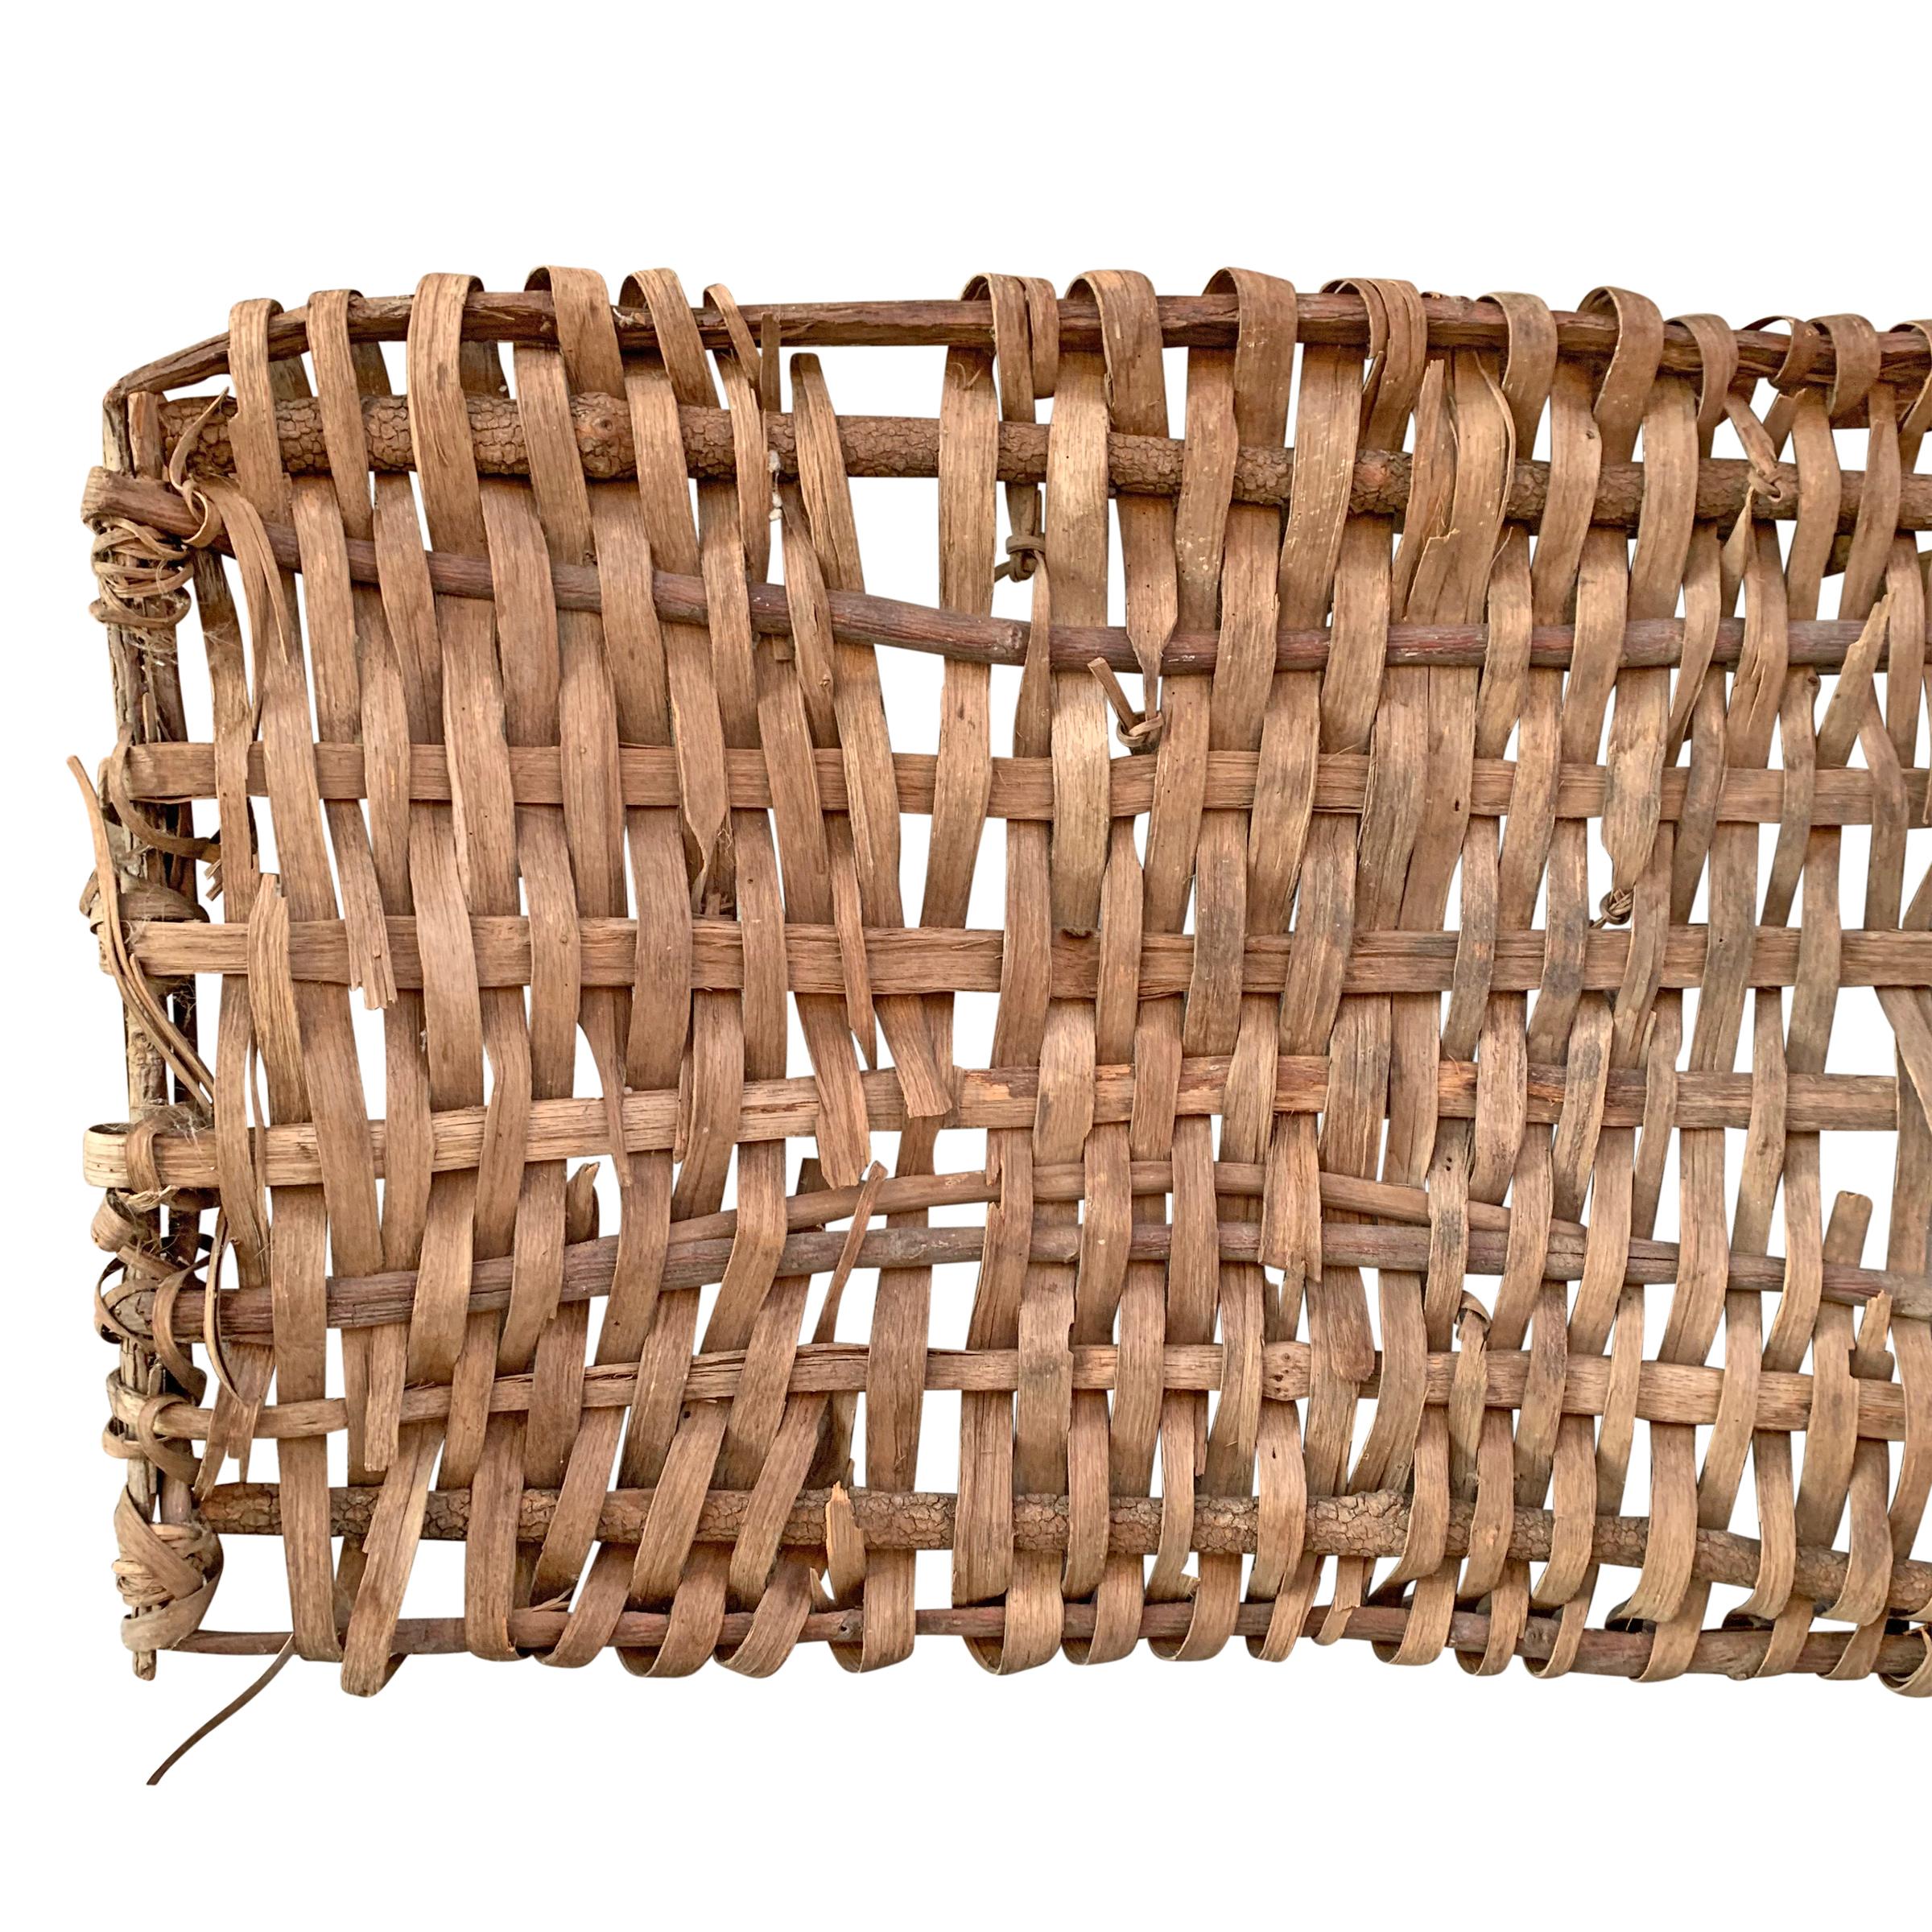 Hand-Woven 19th Century American Drying Basket